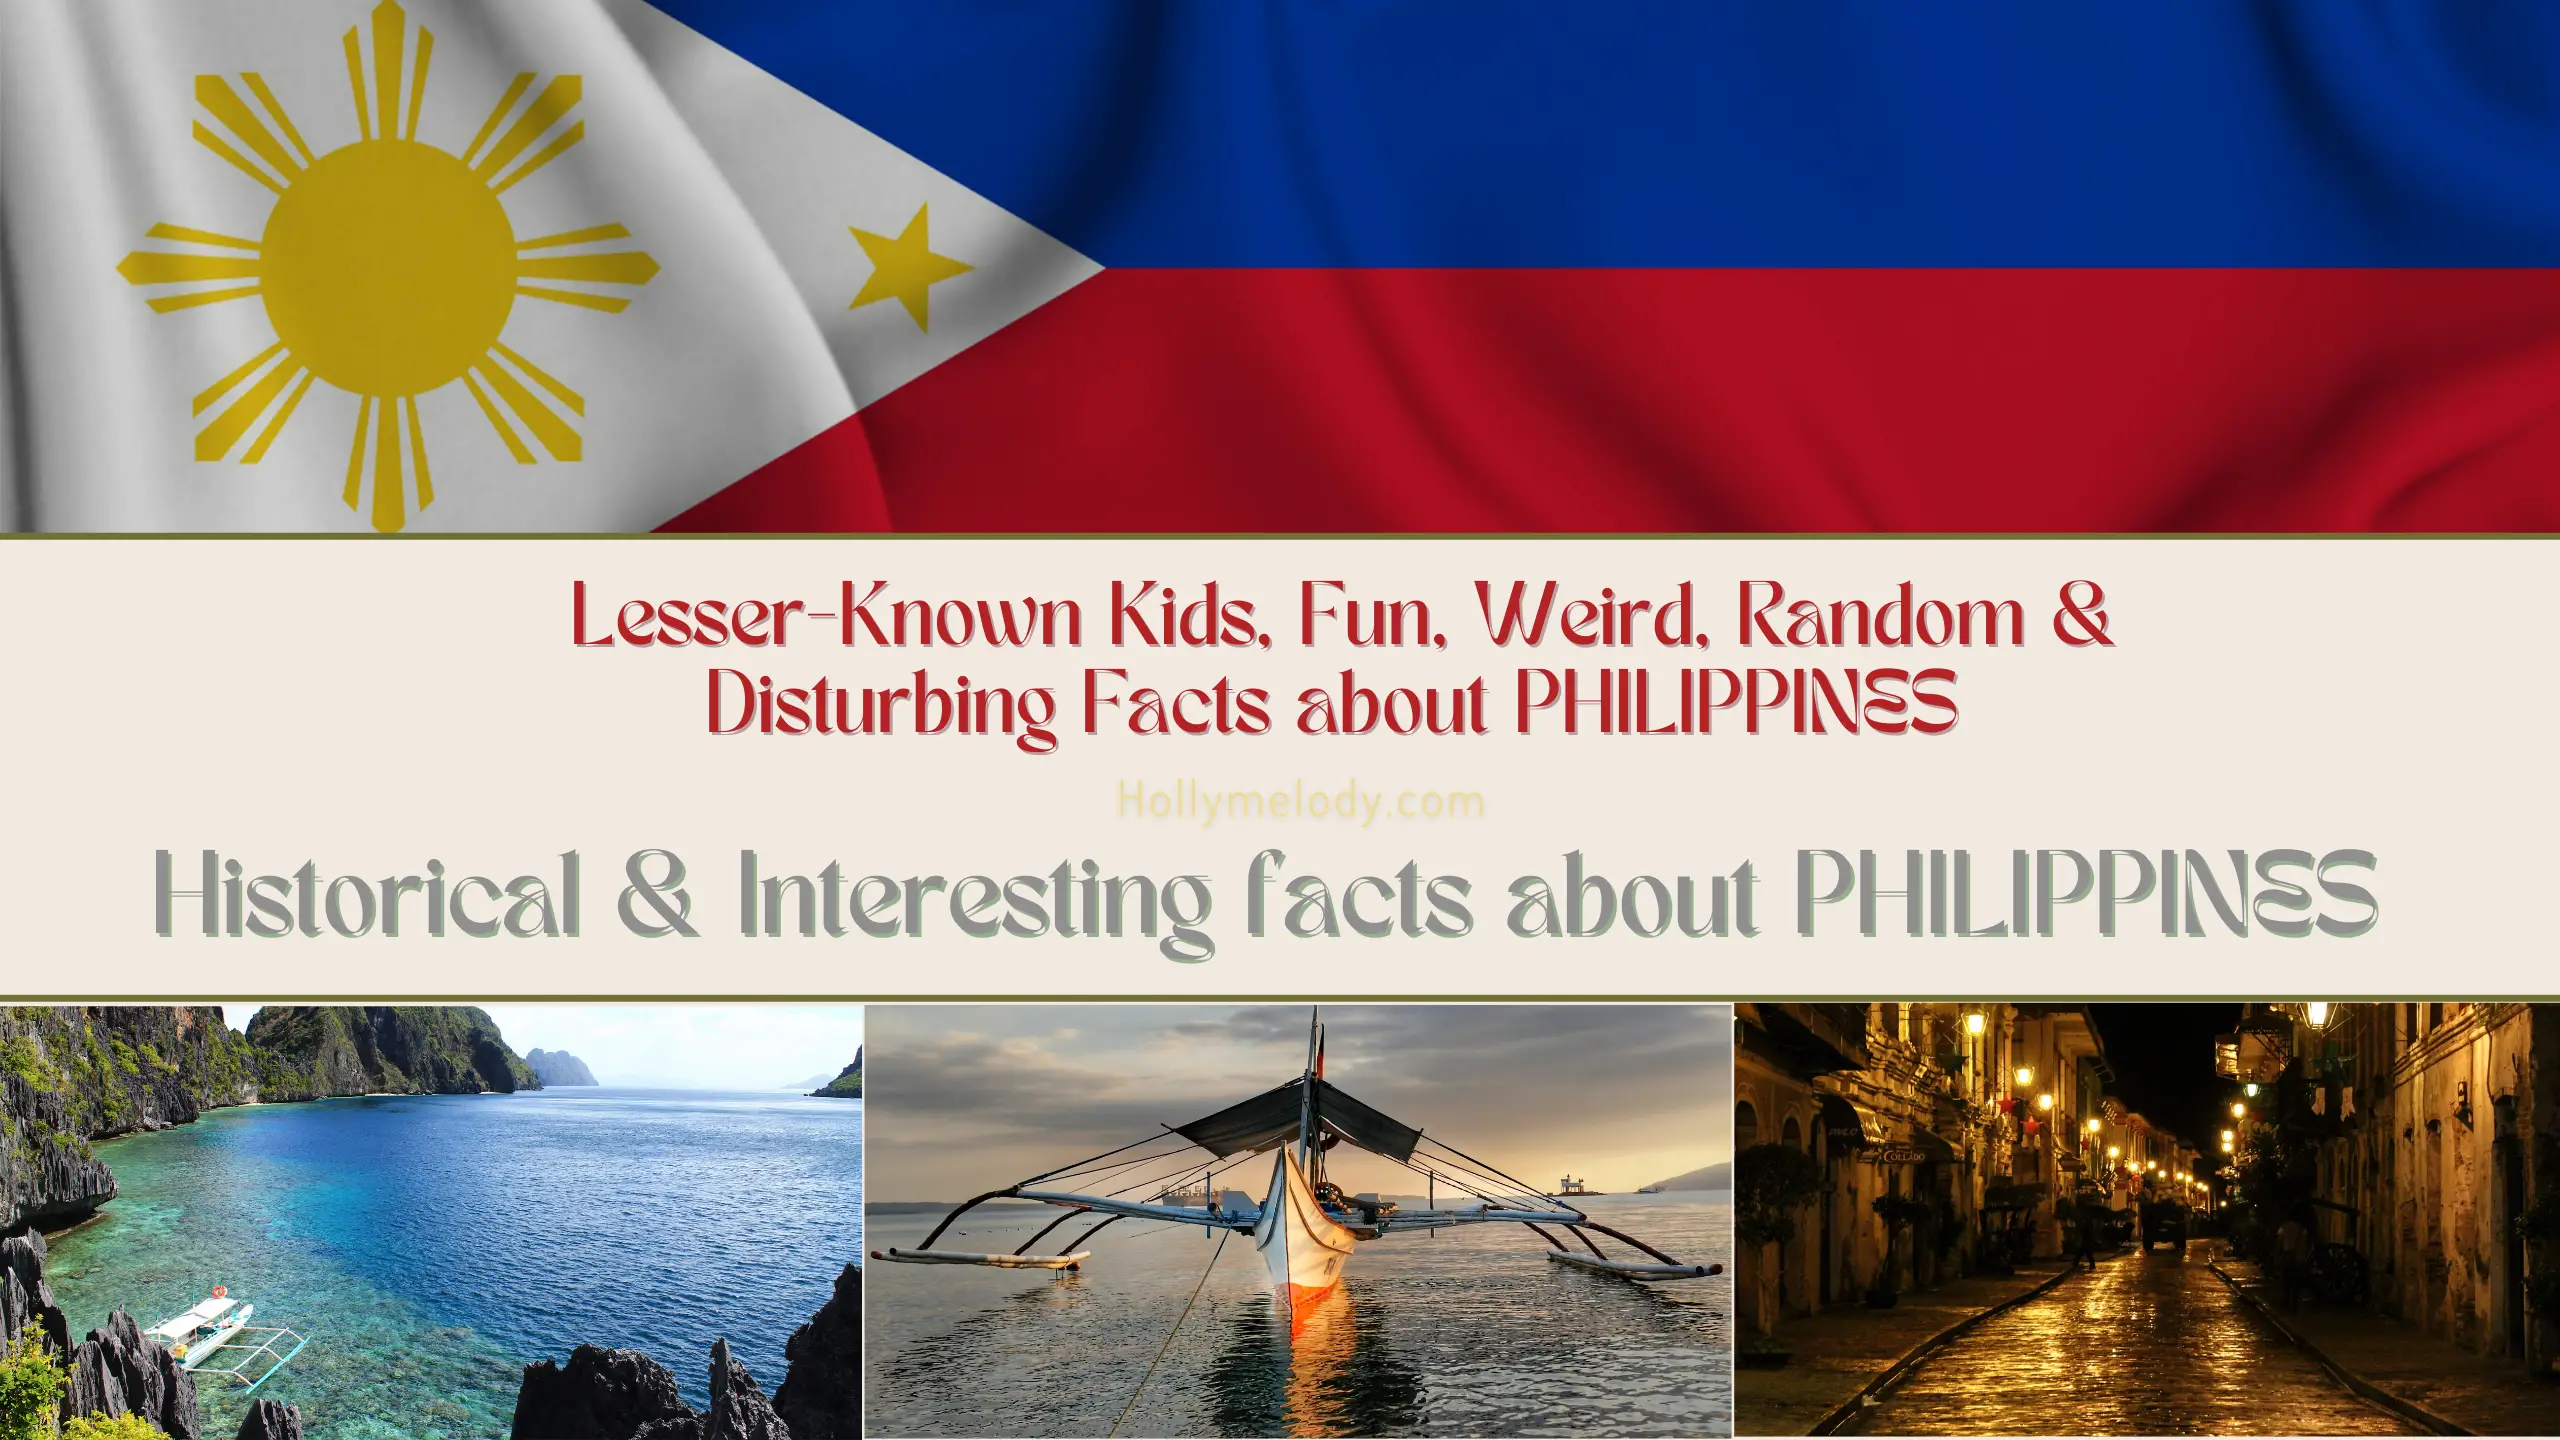 Interesting facts about PHILIPPINES History &#038; Culture